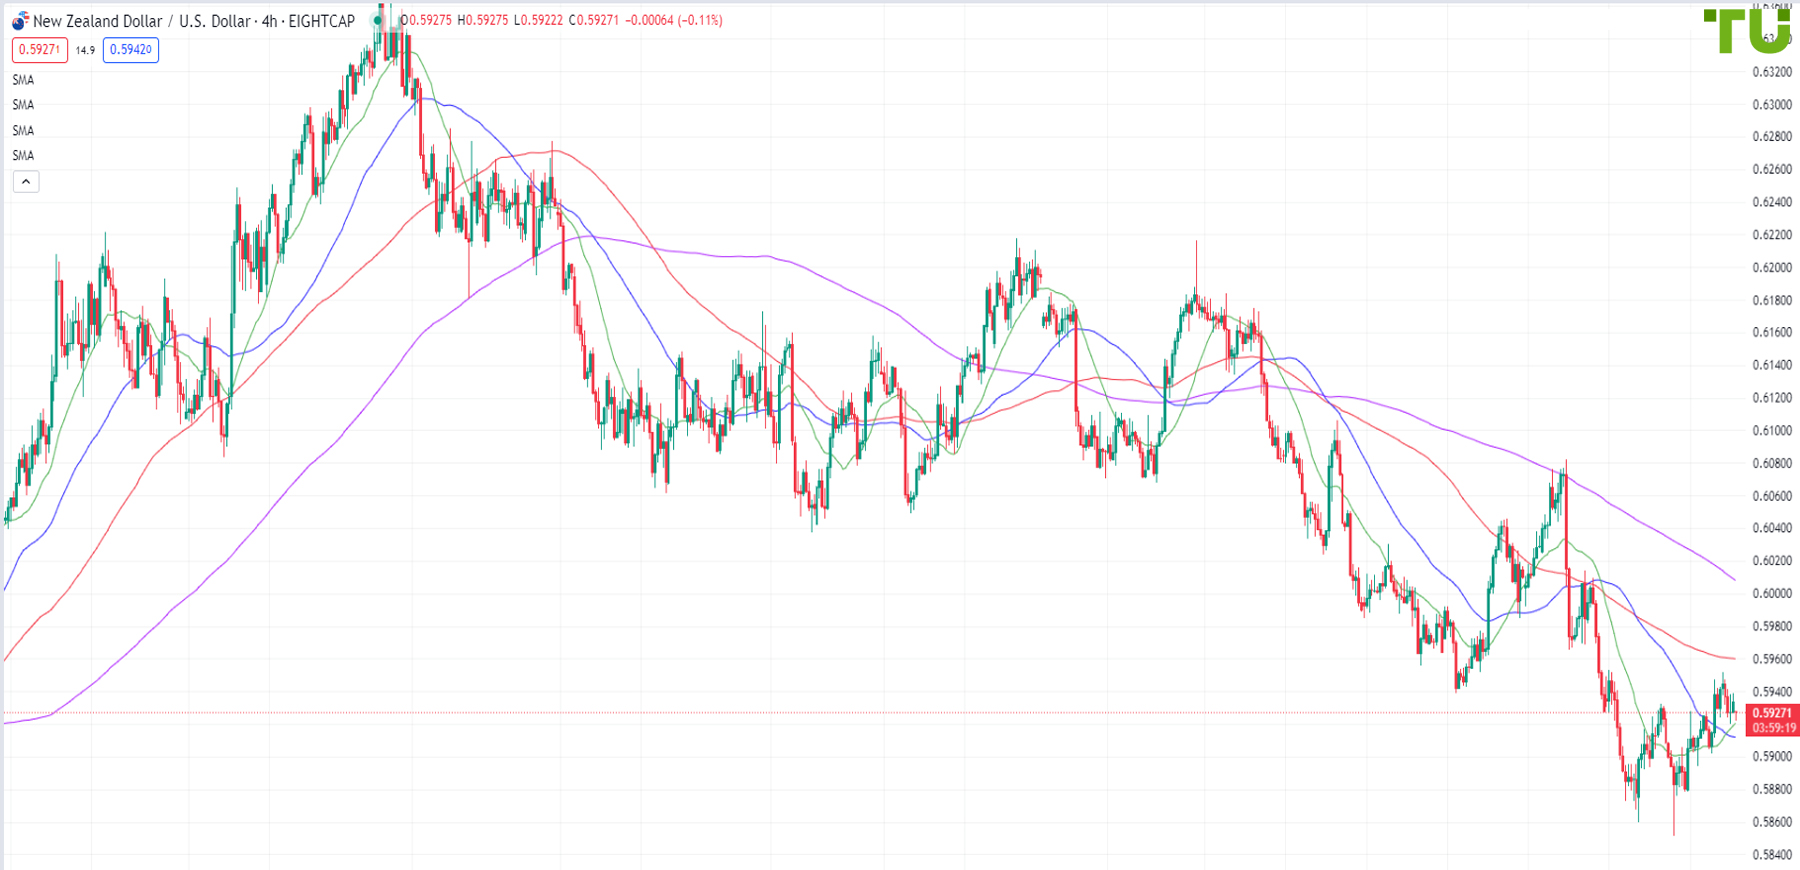 NZD/USD is under moderate pressure after a rise